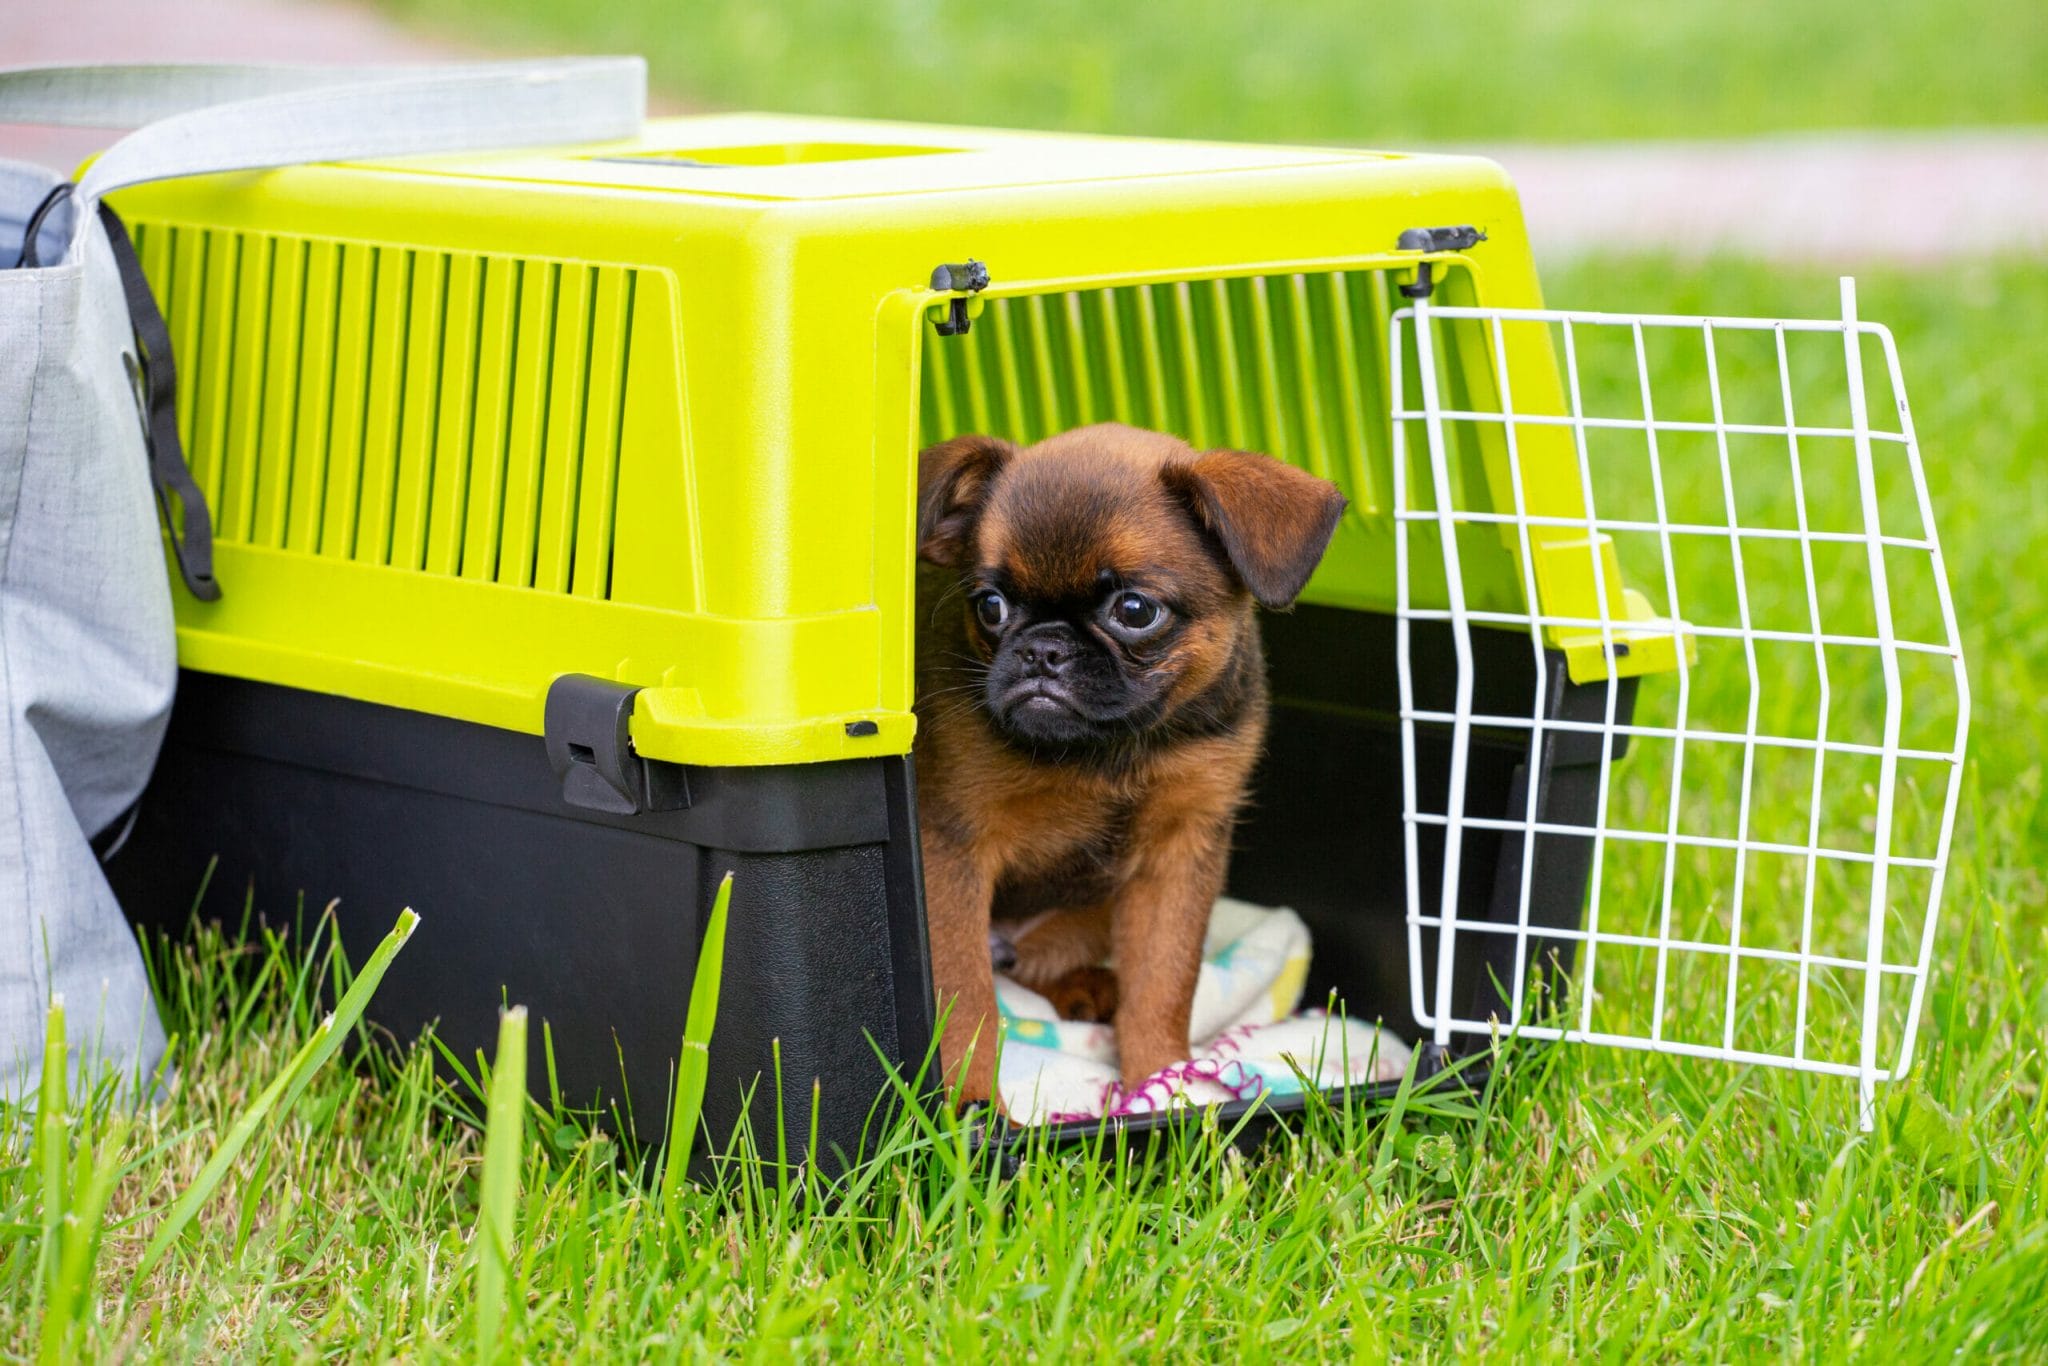 How to insulate a dog crate